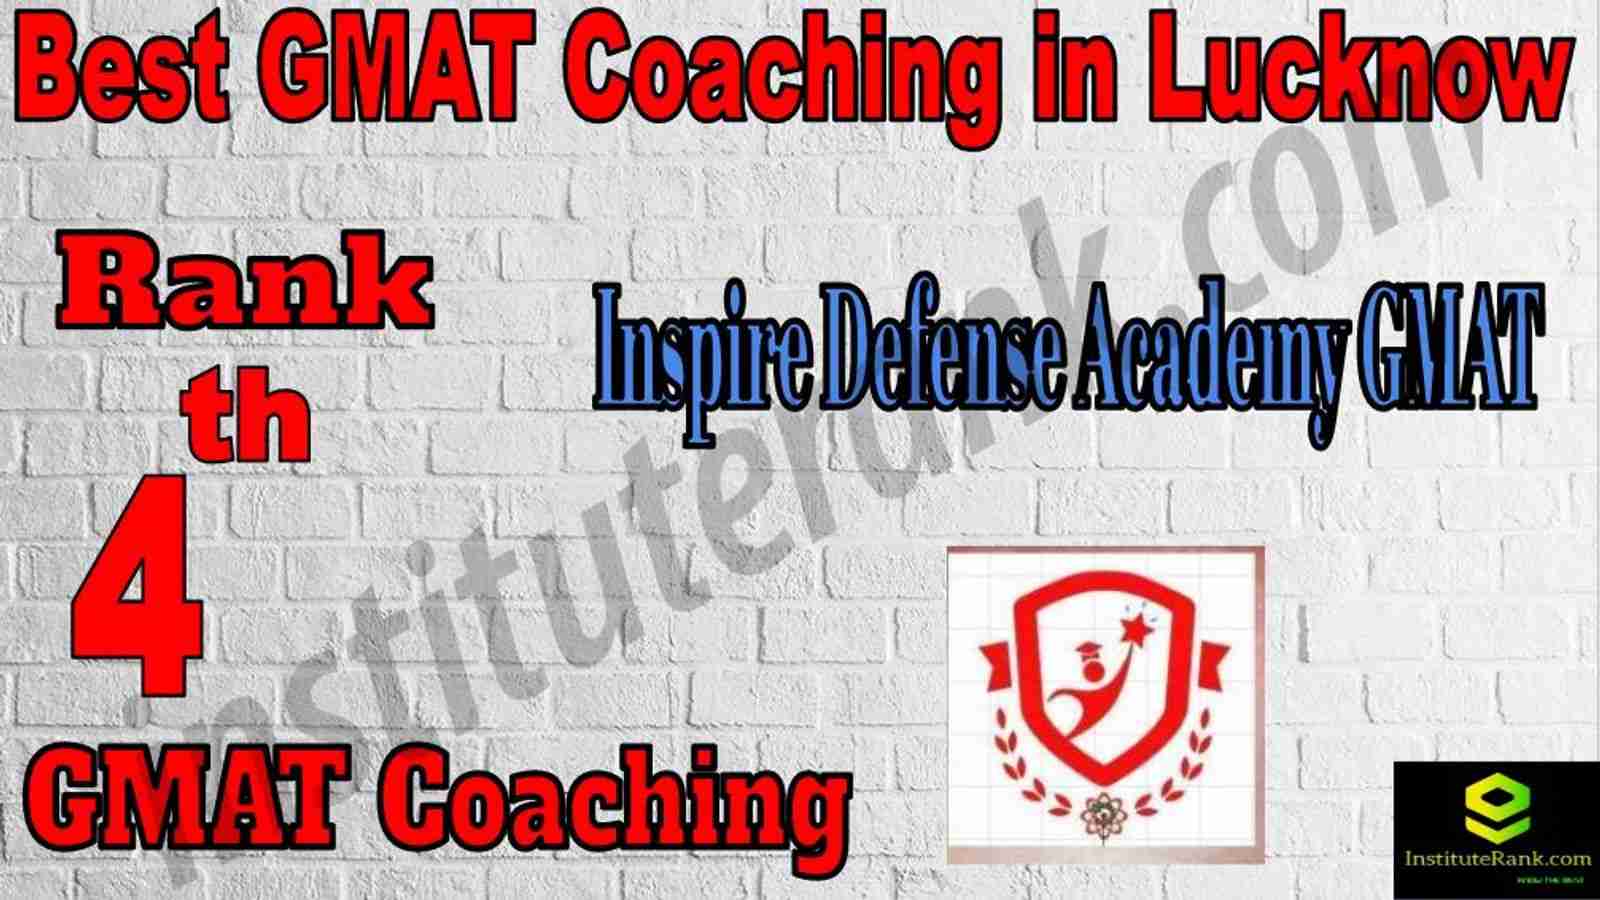 4th Best GMAT Coaching in Lucknow